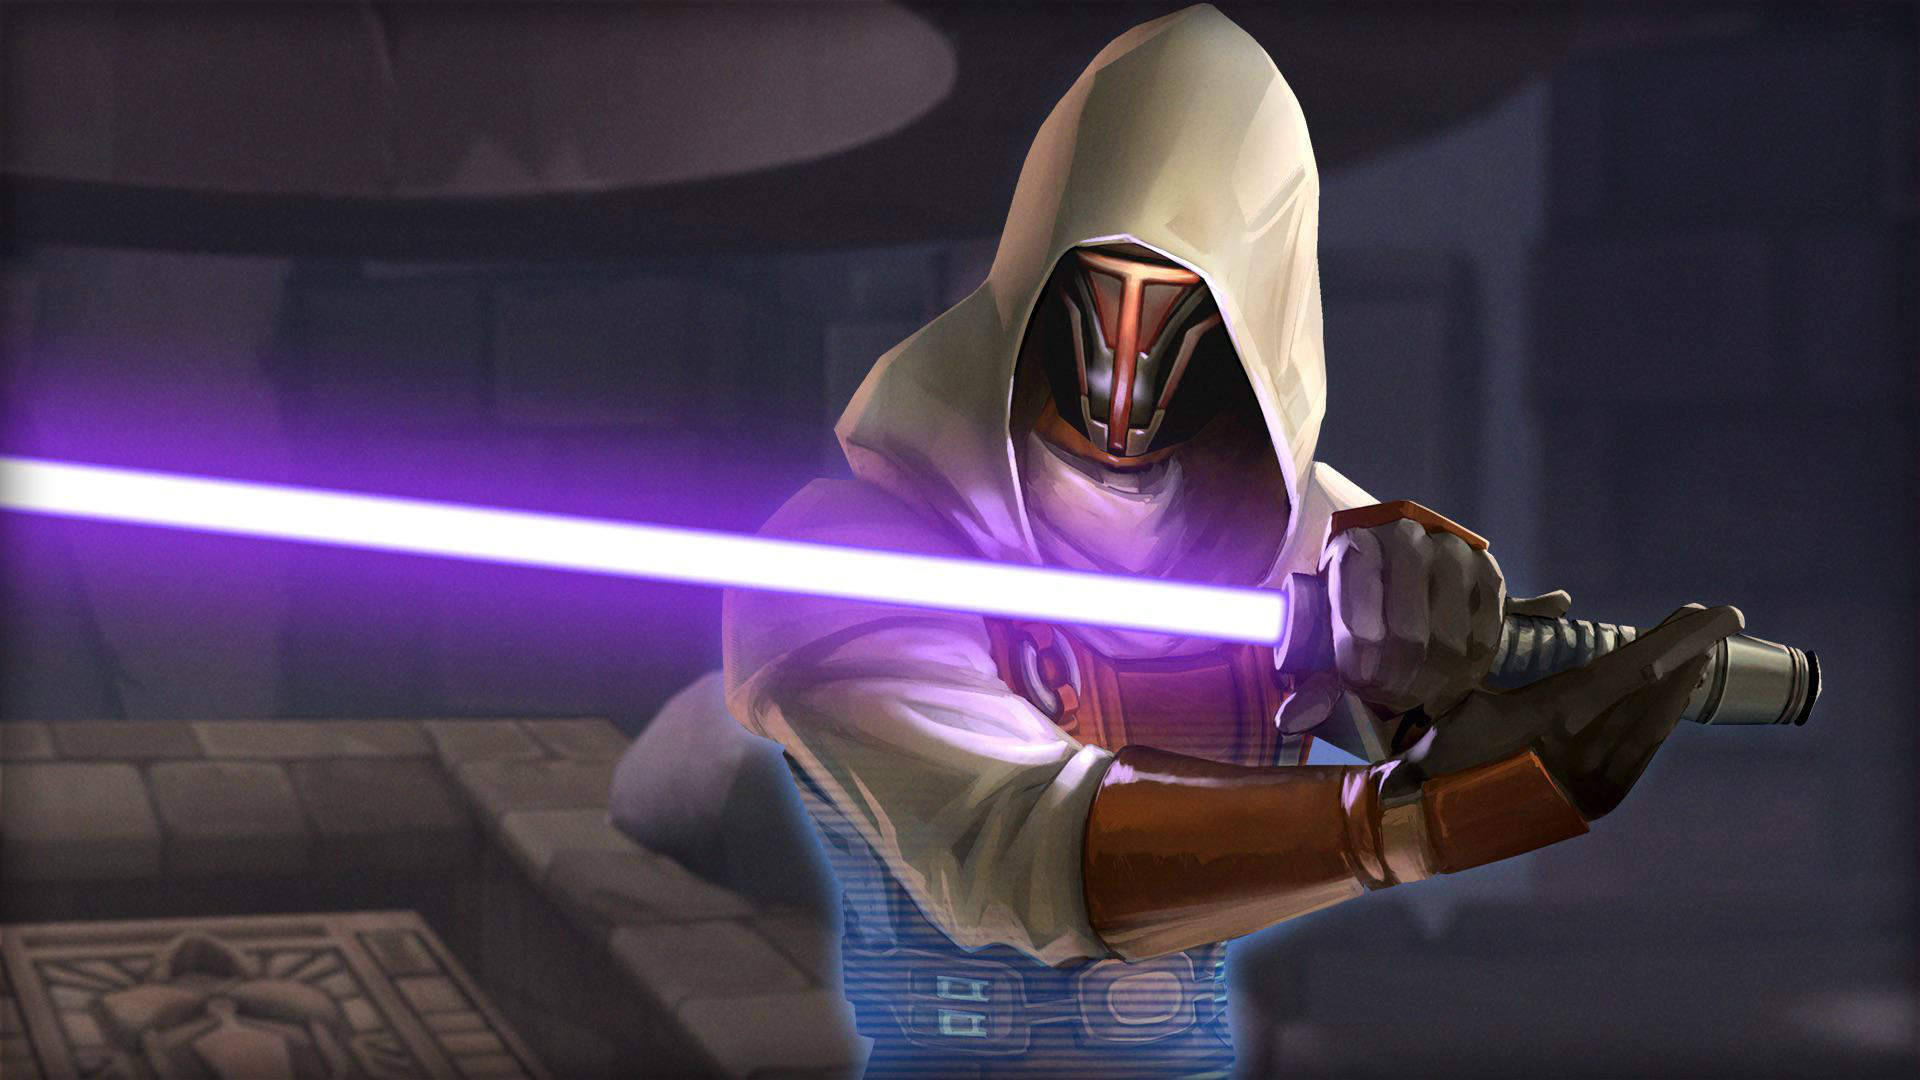 Darth Revan, The Powerful Sith Lord